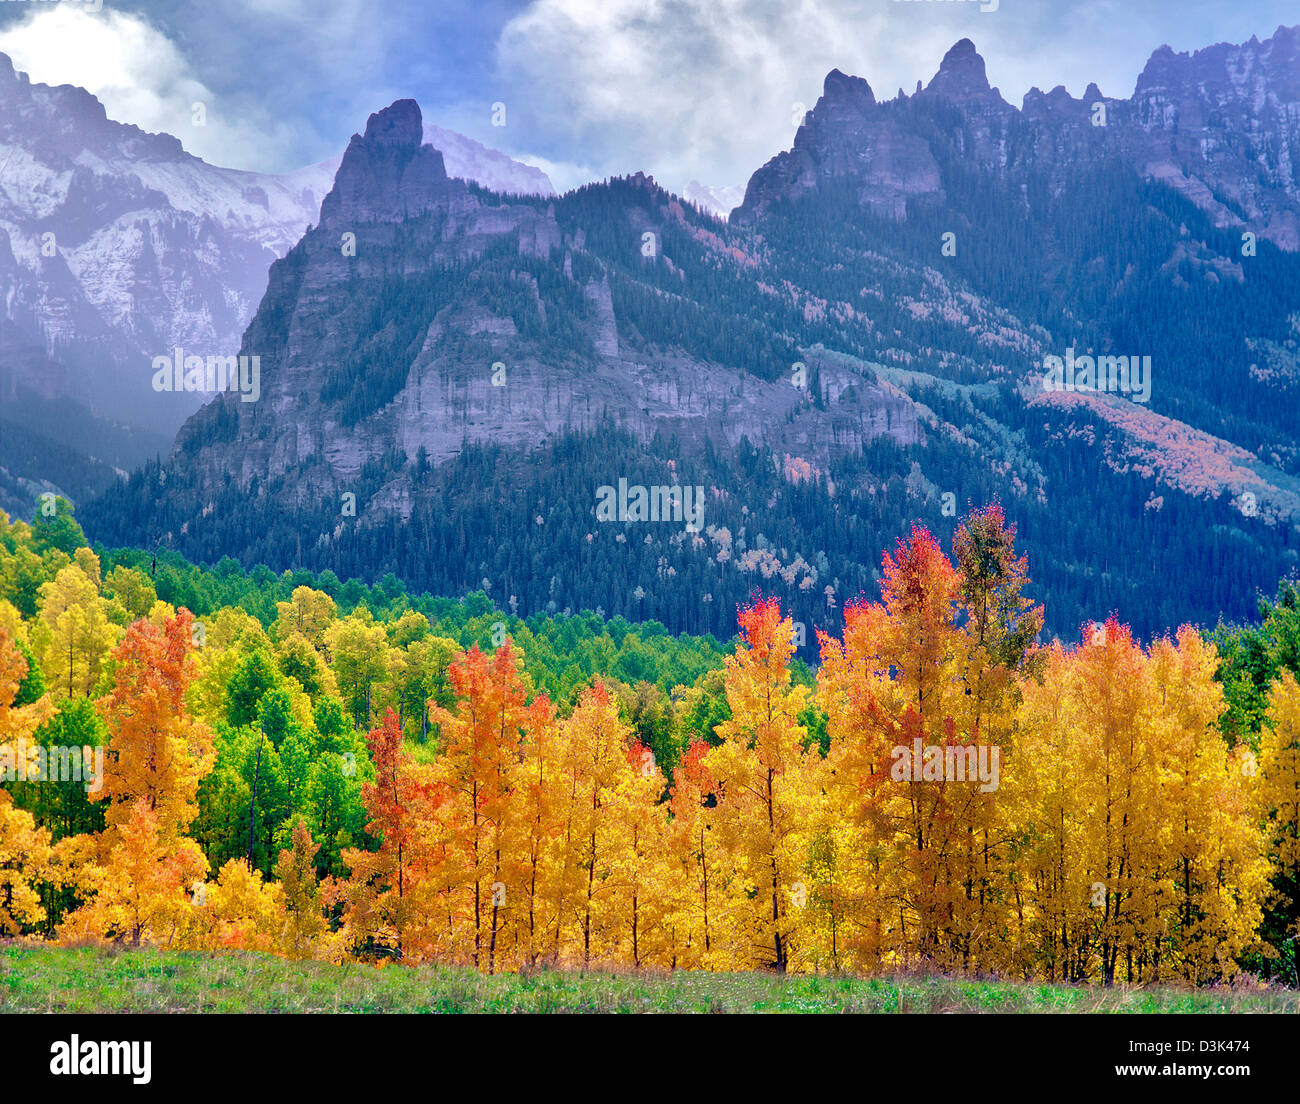 Aspen trees in fall color with storm clouds. Uncompahgre National Forest, Colorado Stock Photo